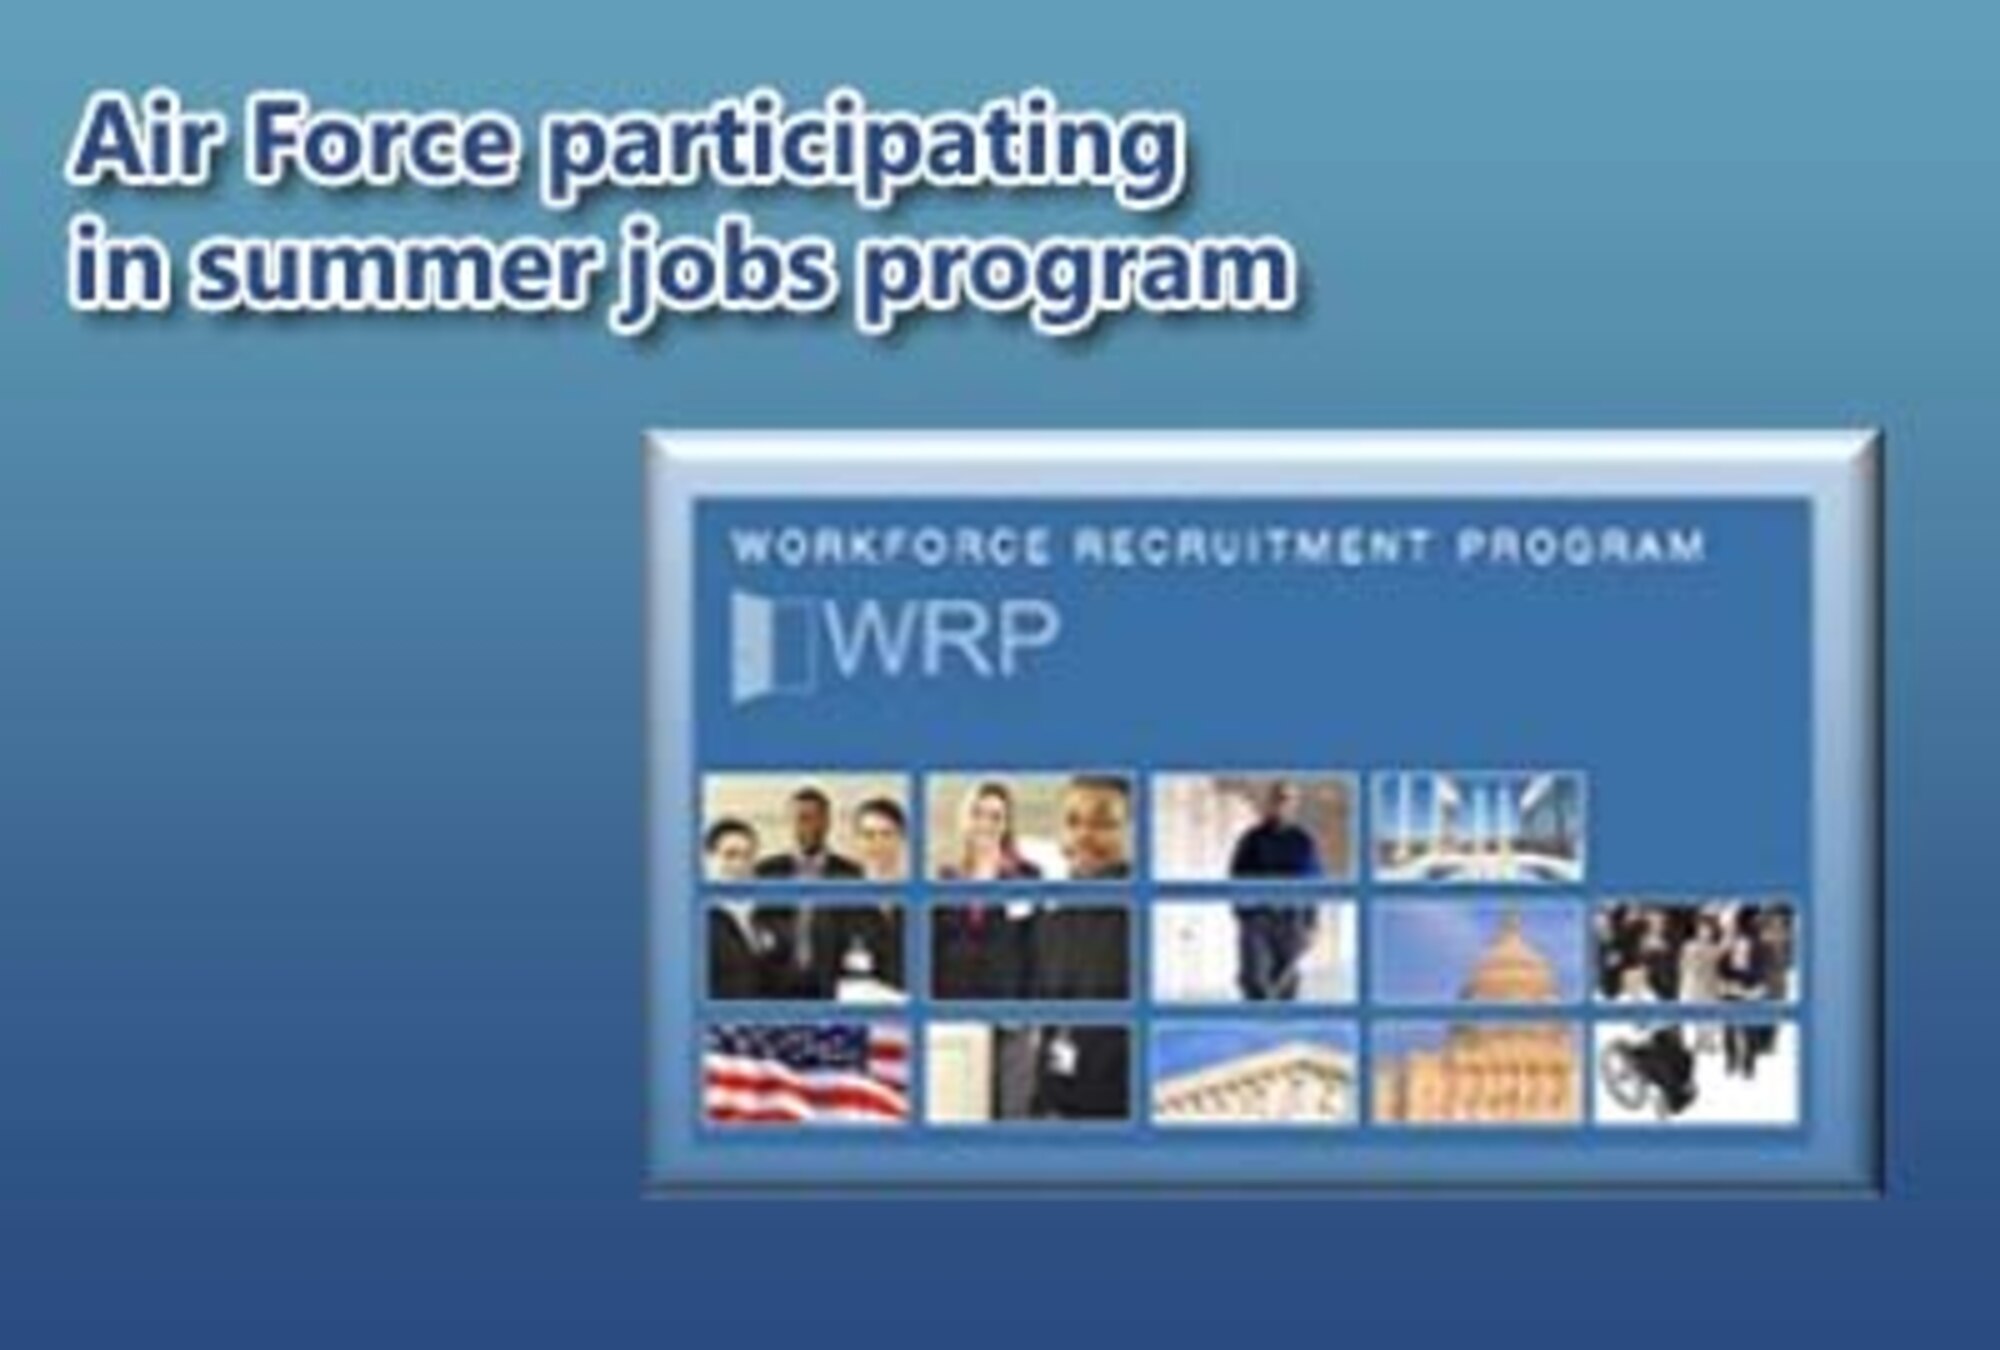 Air Force organizations have the opportunity to begin hiring students March 17 for temporary, funded positions as part of the 2010 Workforce Recruitment Program for College Students with Disabilities.